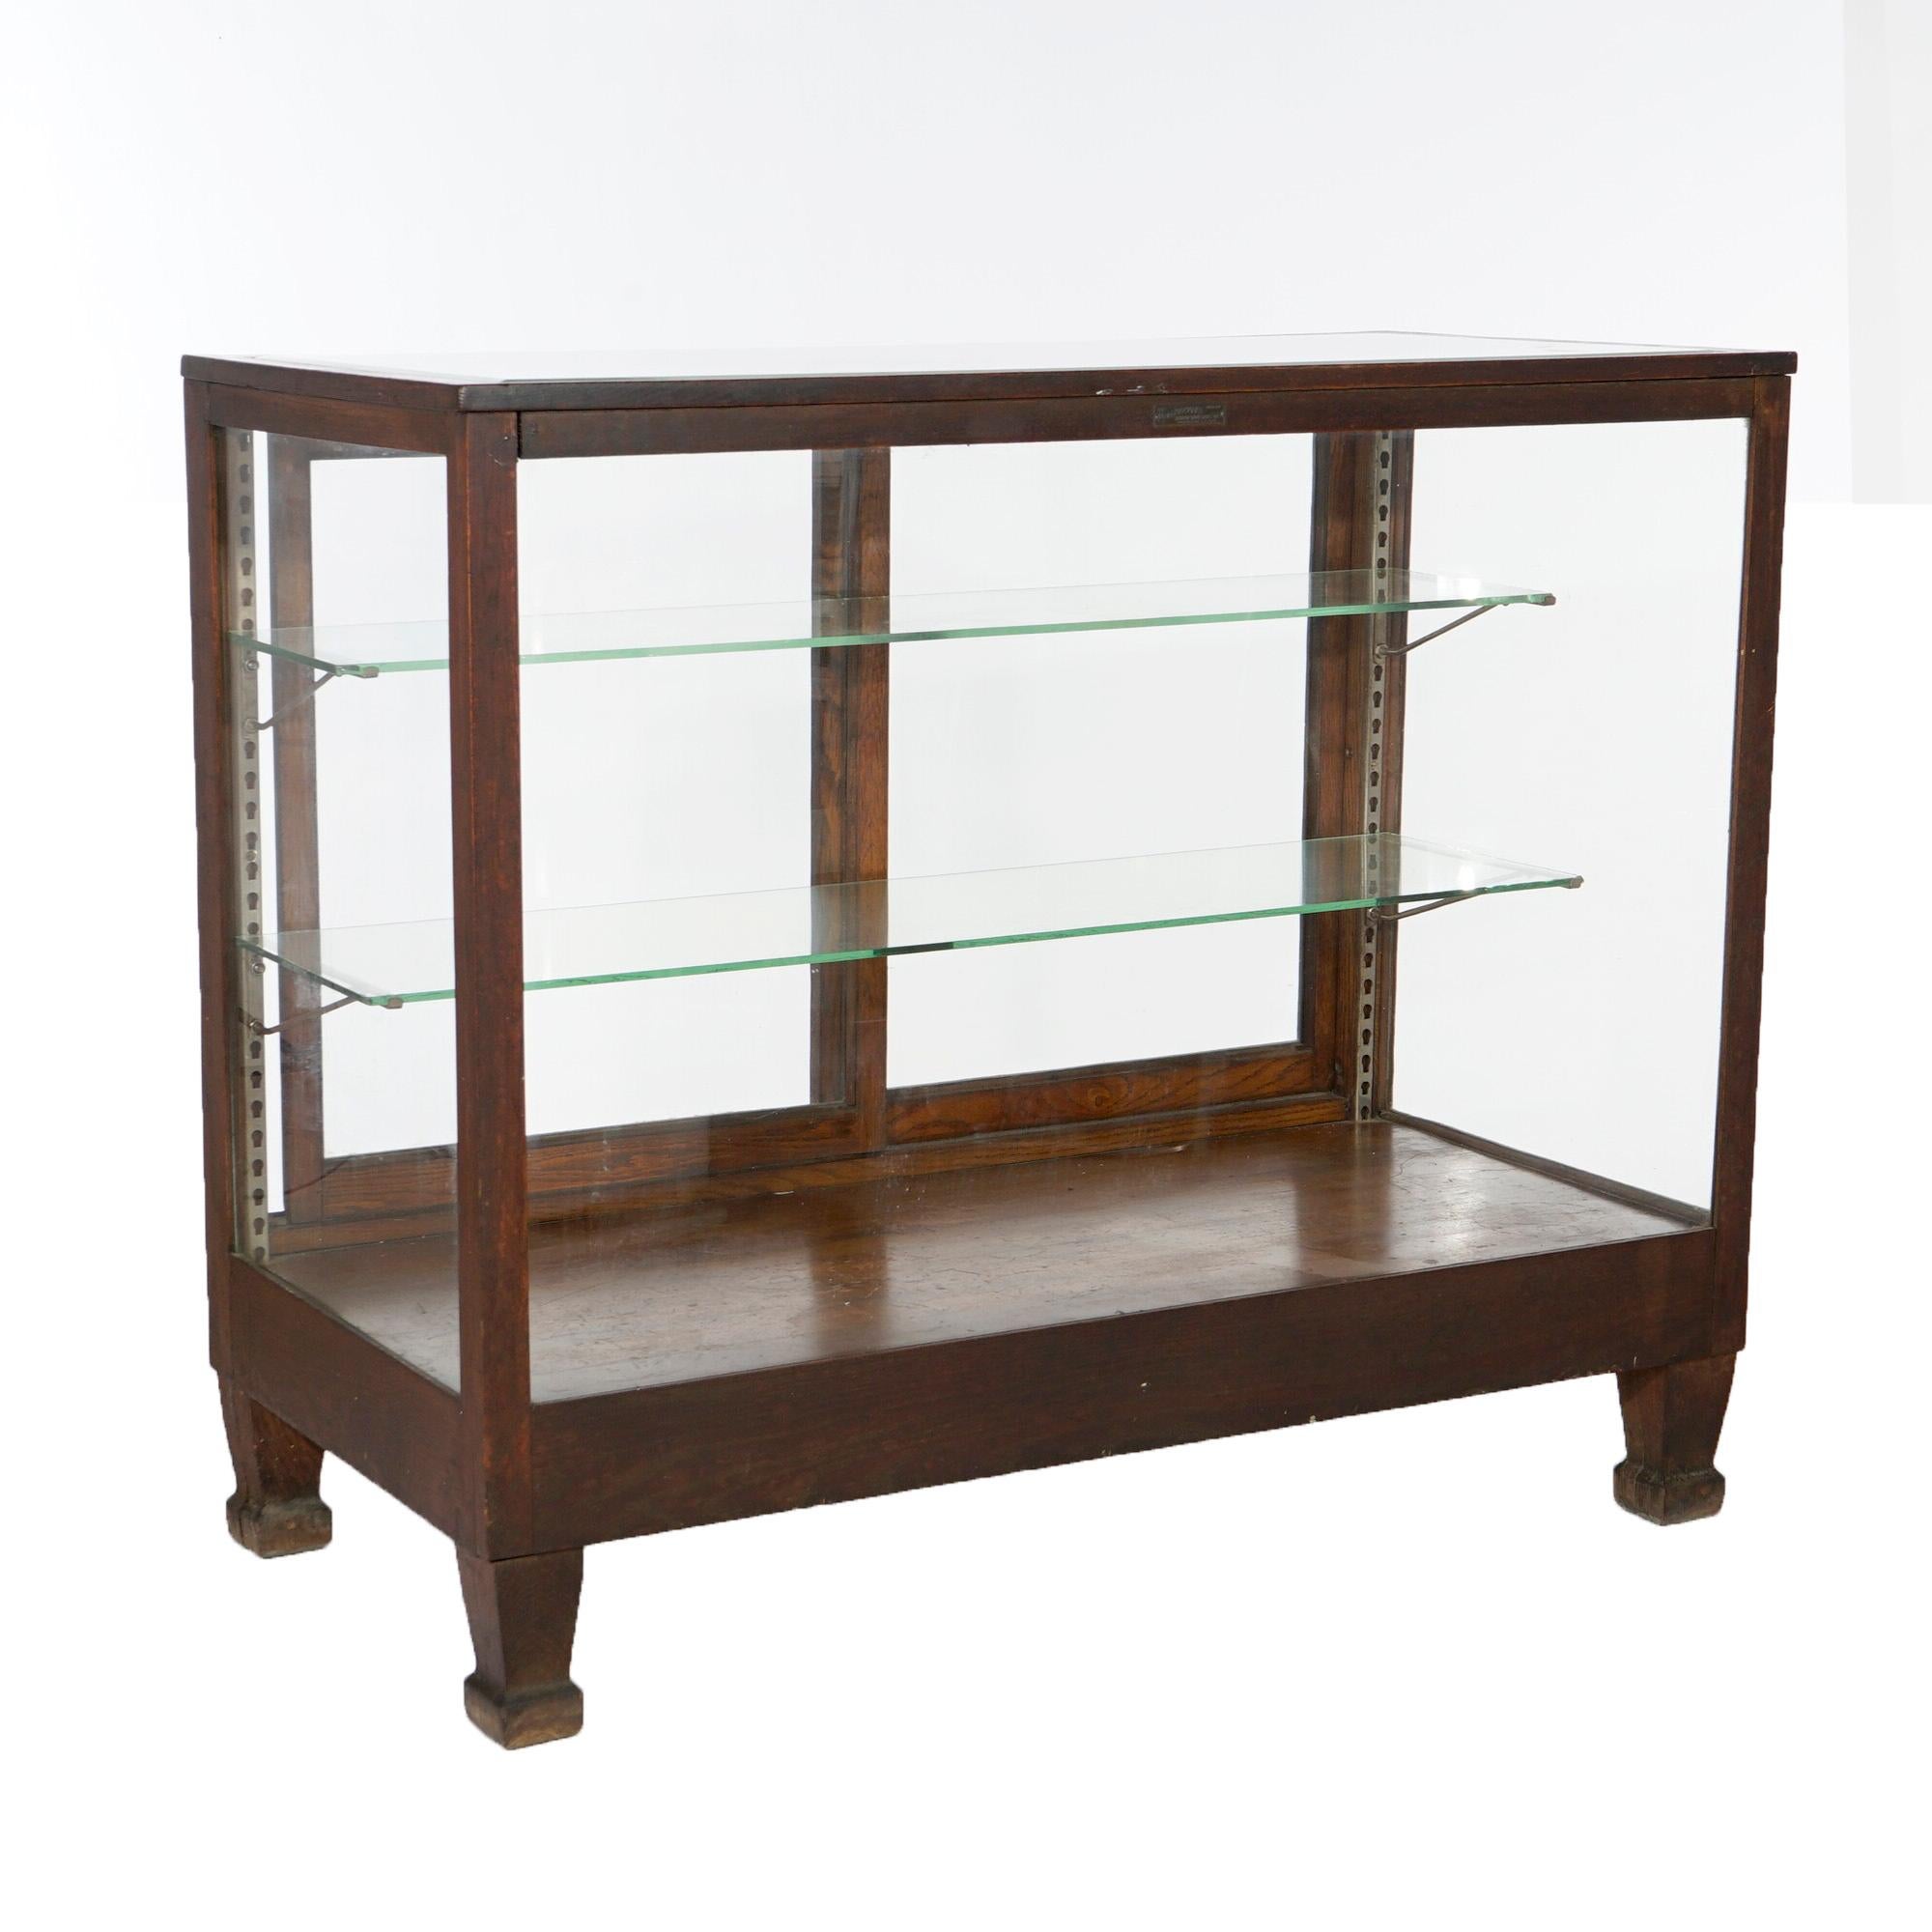 An antique Arts and Crafts country store counter display case by Wilmarth offers oak frame with sliding doors opening to adjustable shelf interior, raise on square and tapered legs, c1900

Measures- 42.25'' H x 48'' W x 25'' D.

*Ask about